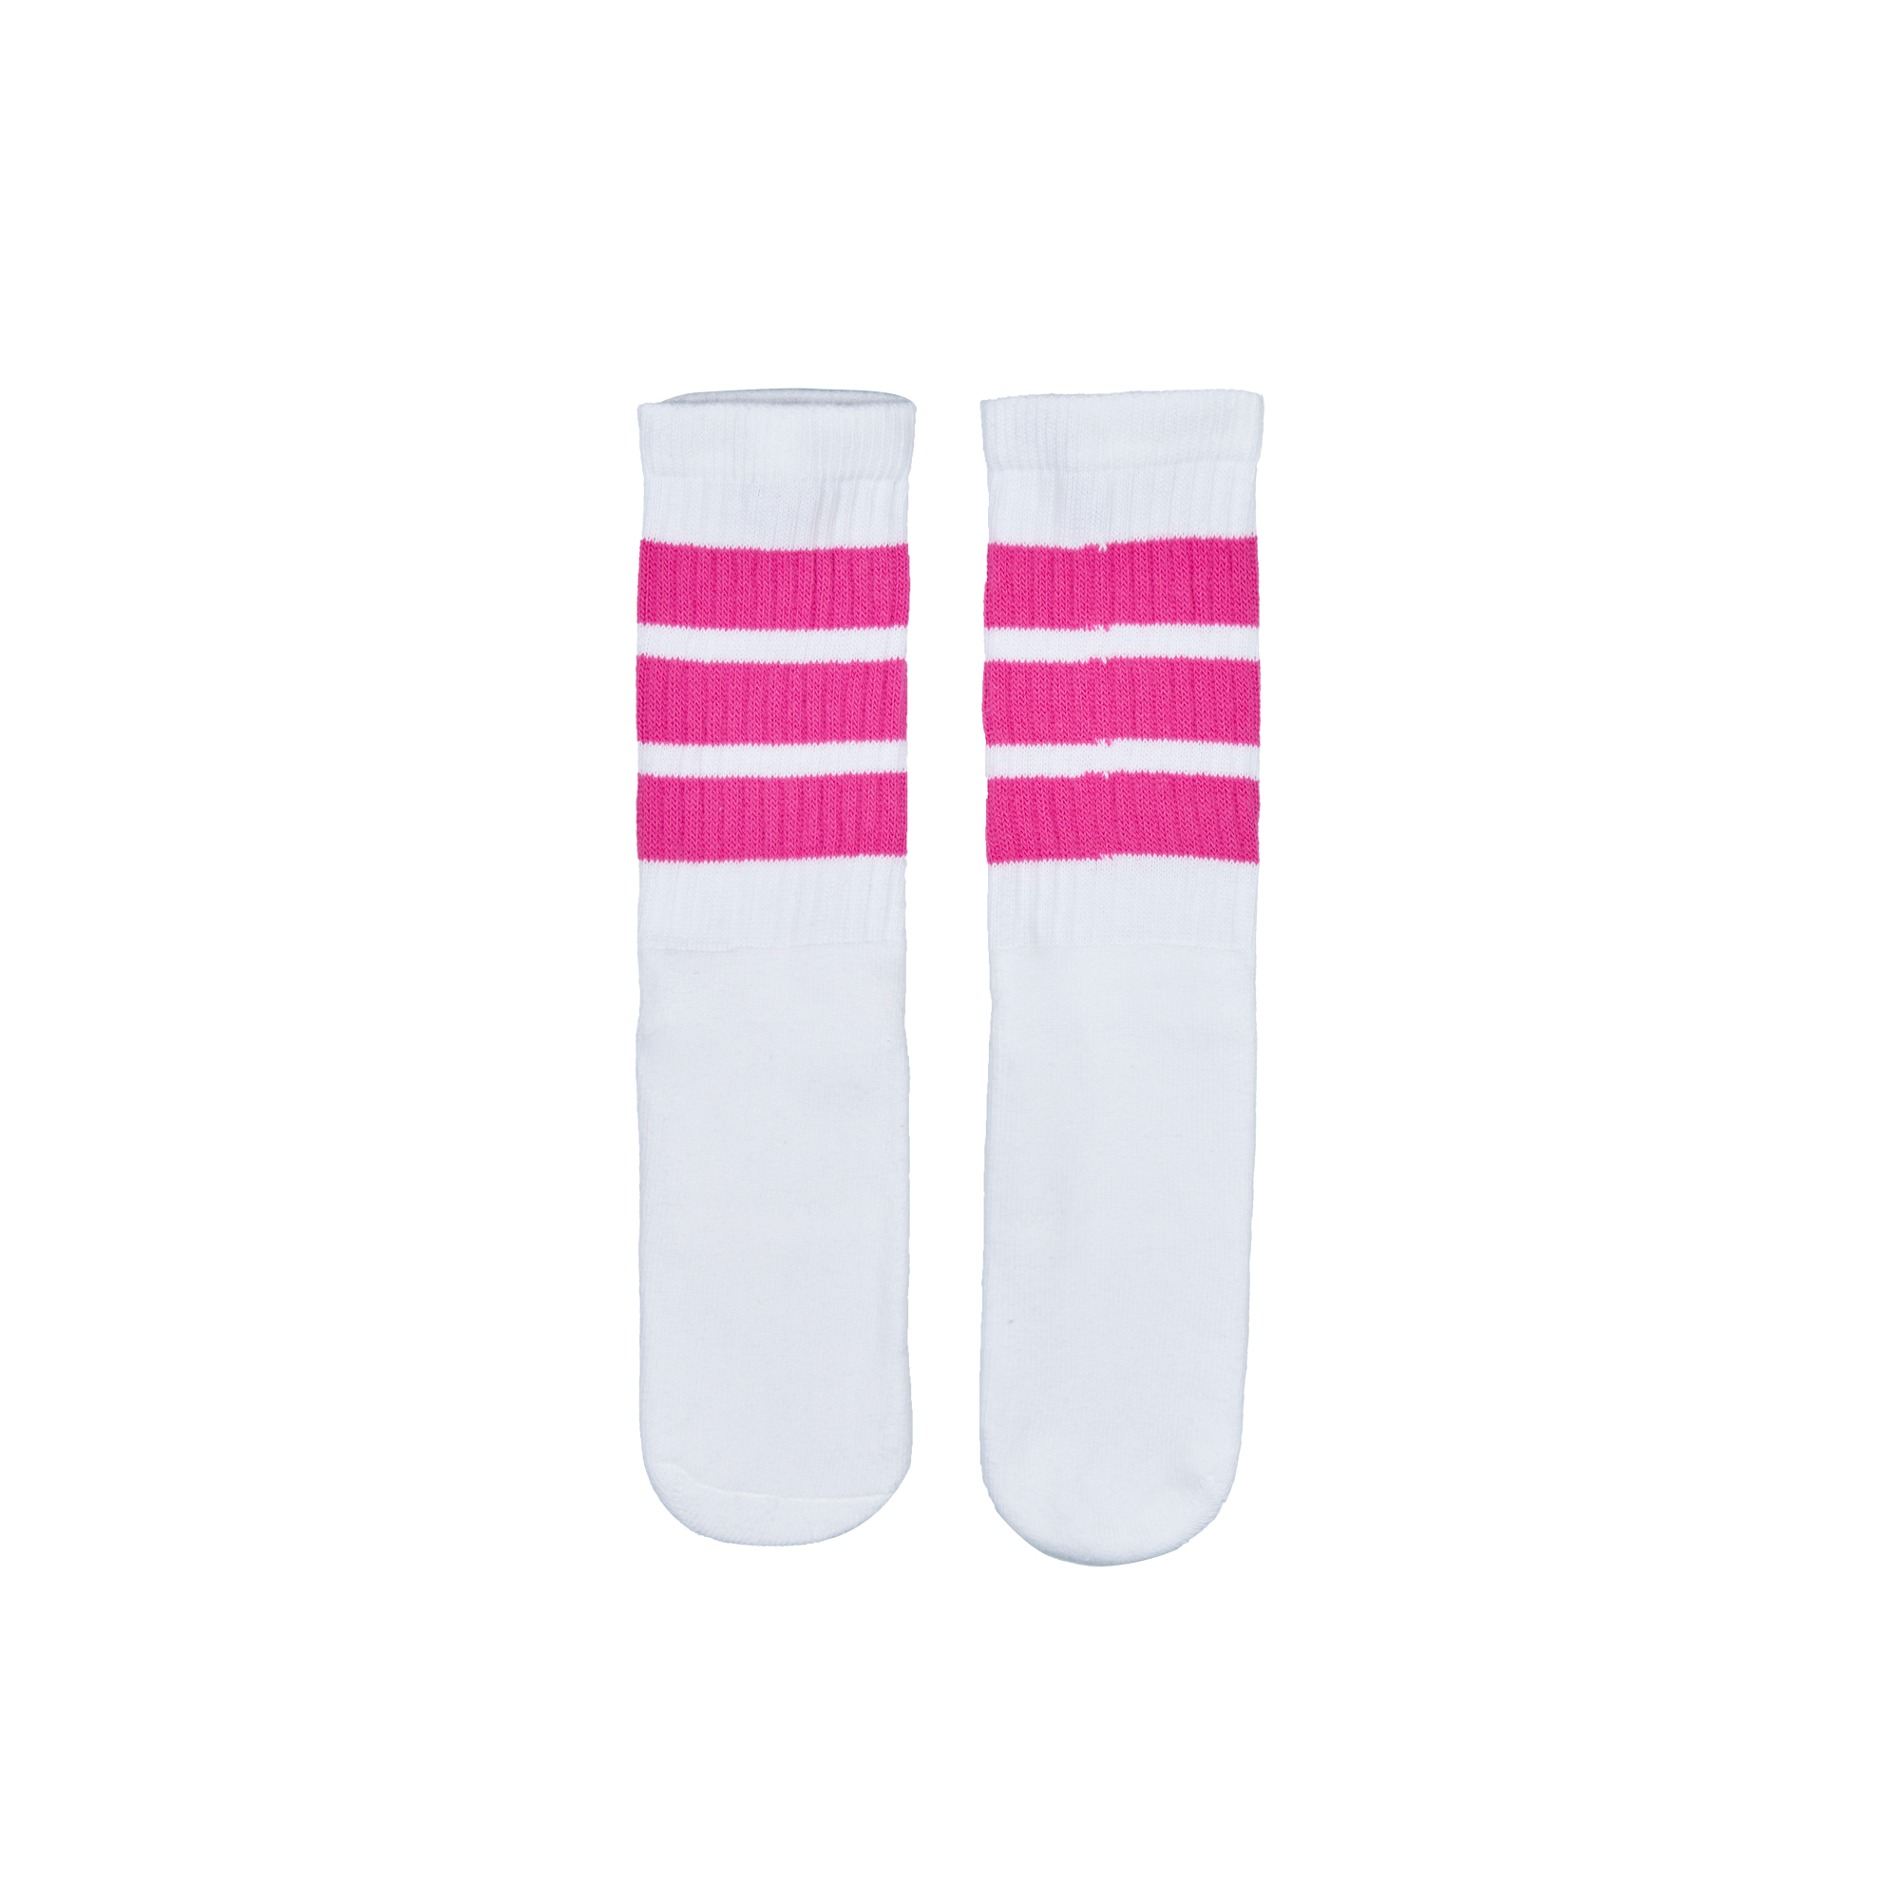 KIDS WHITE TUBE SOCKS WITH HOT PINK STRIPES STYLE 1